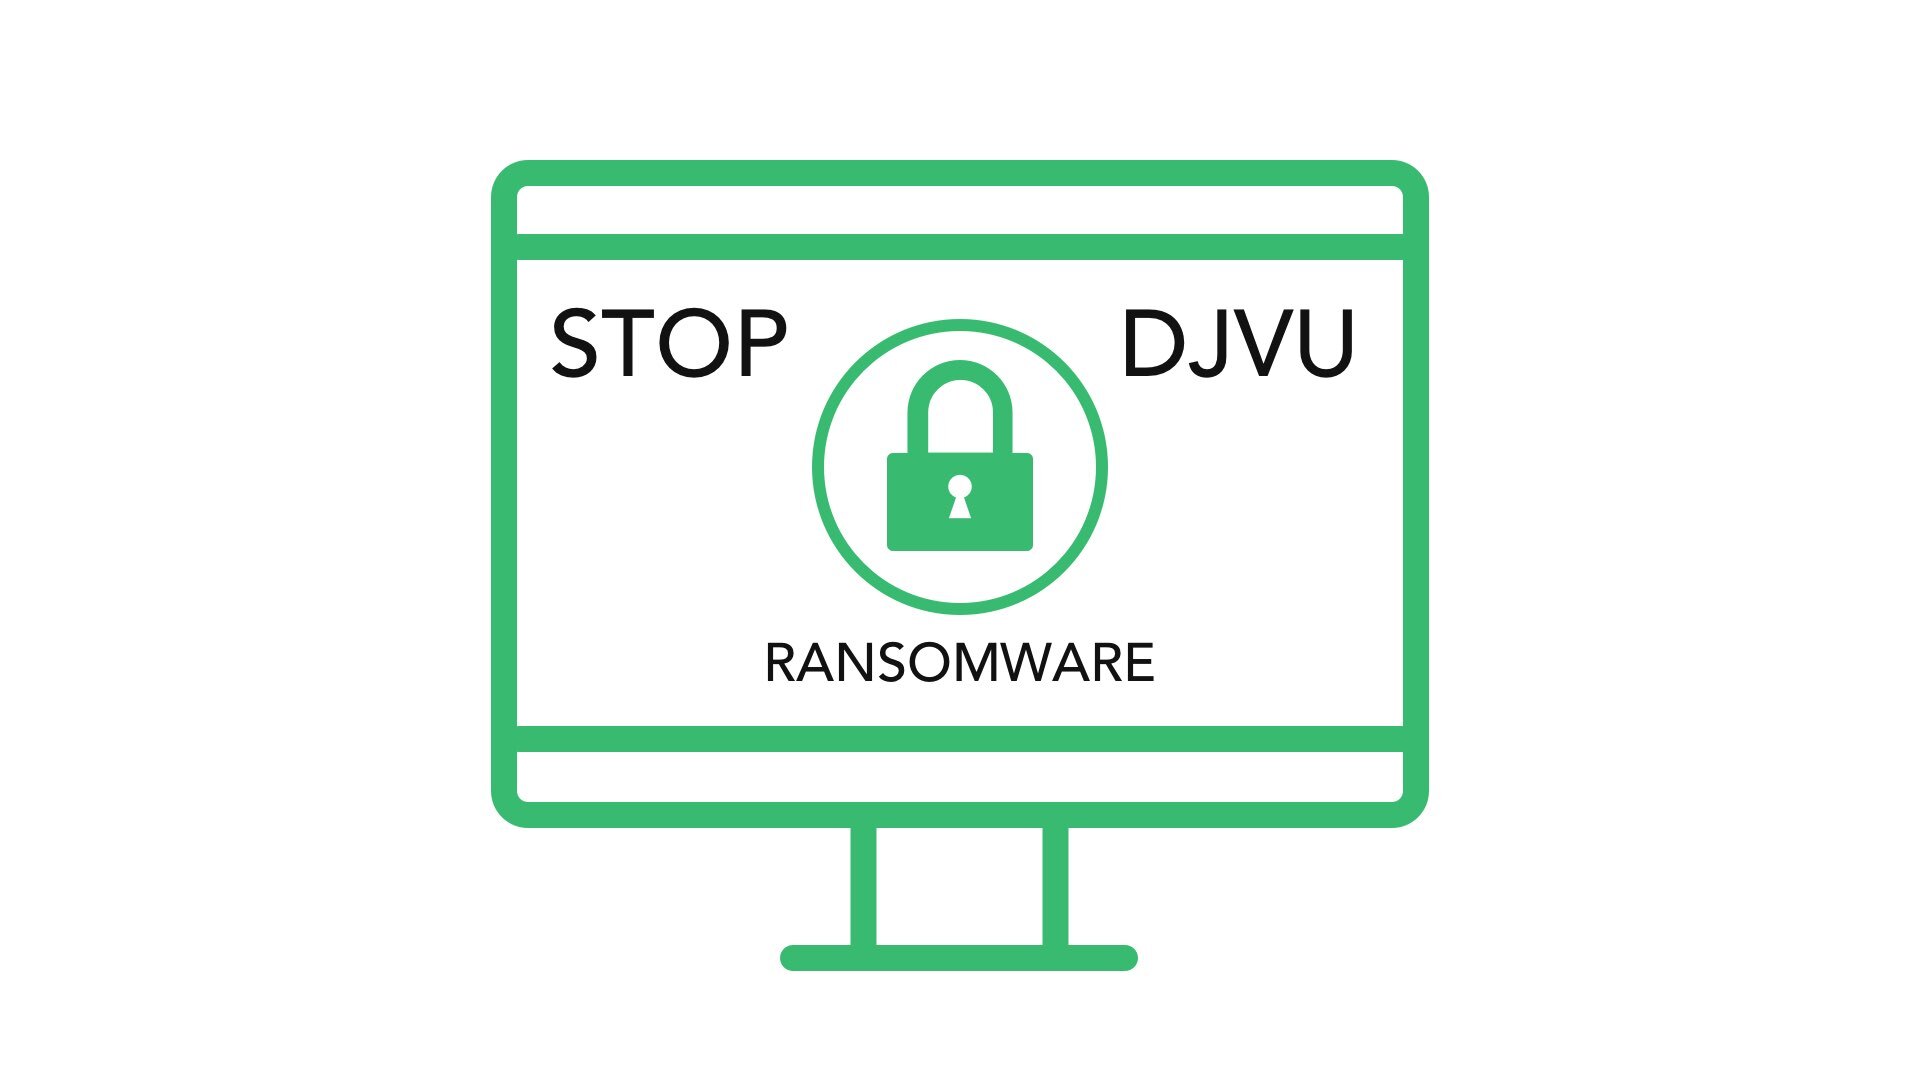 STOP/Djvu ransomware. The biggest hazard of these days